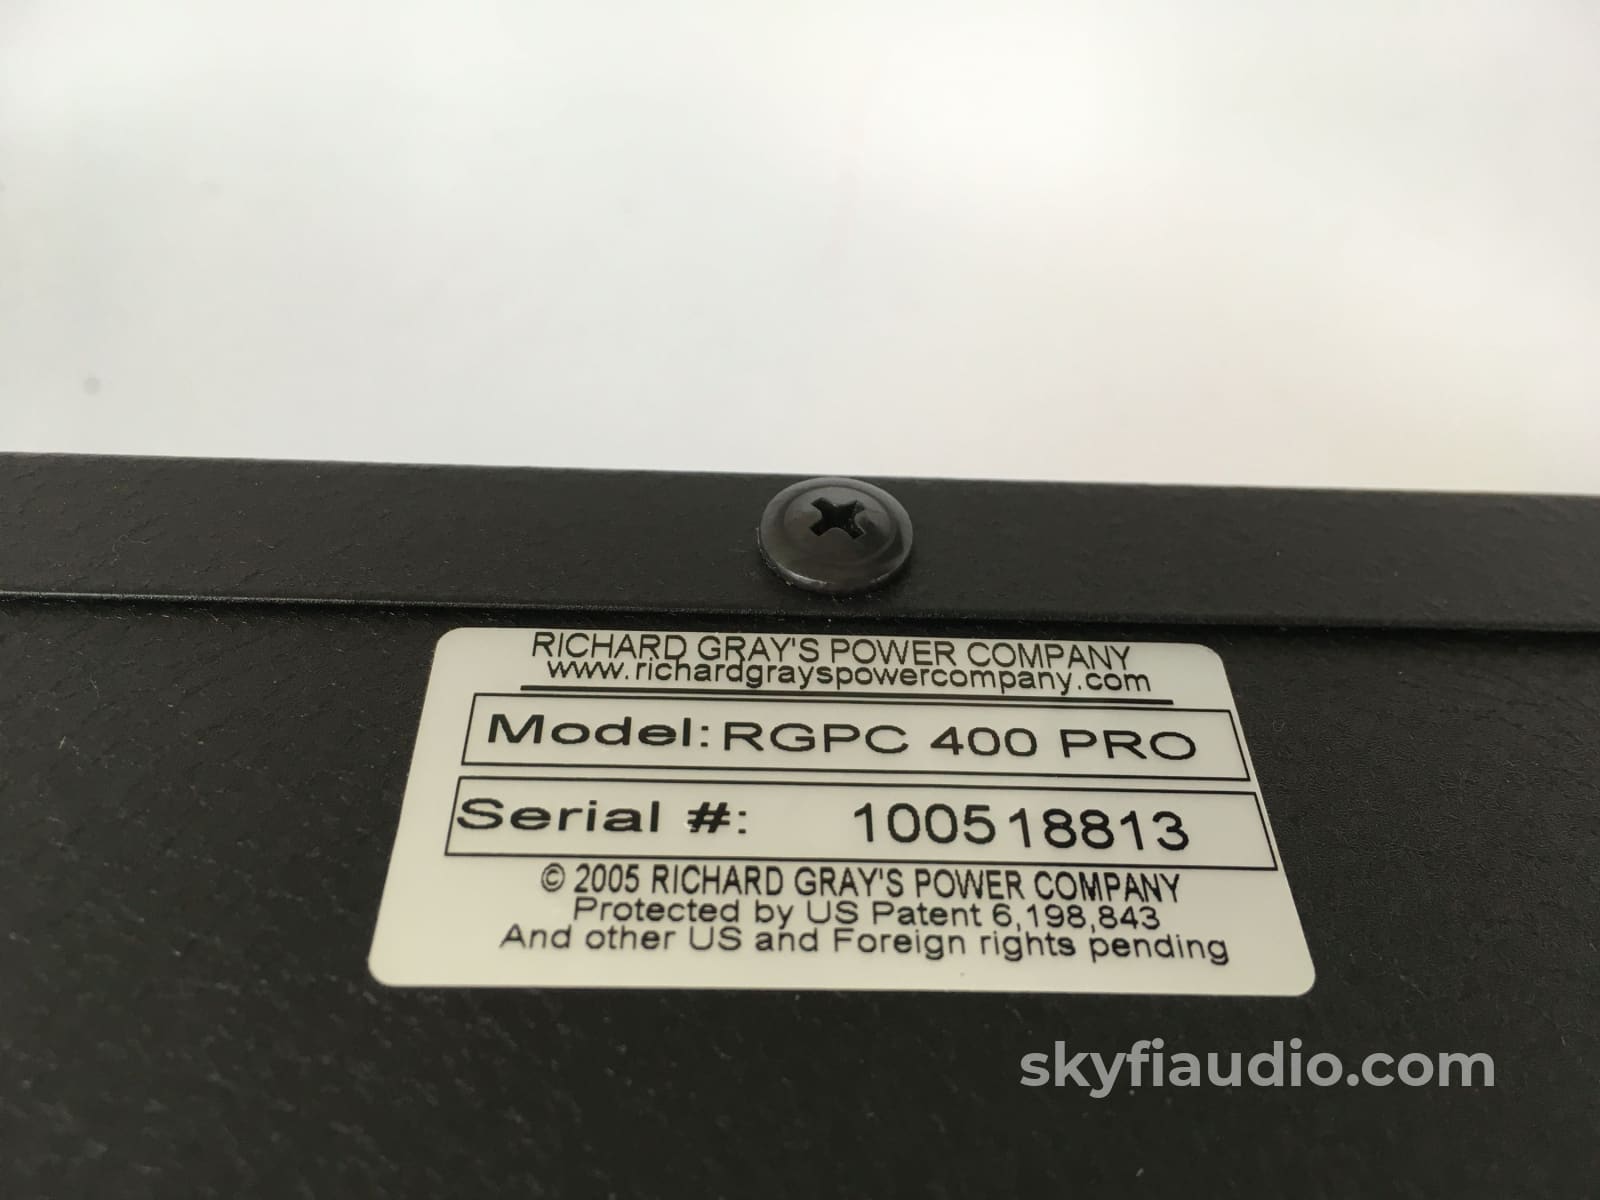 Richard Gray Rgpc 400 Pro Power Conditioner - 20A 4 Outlets